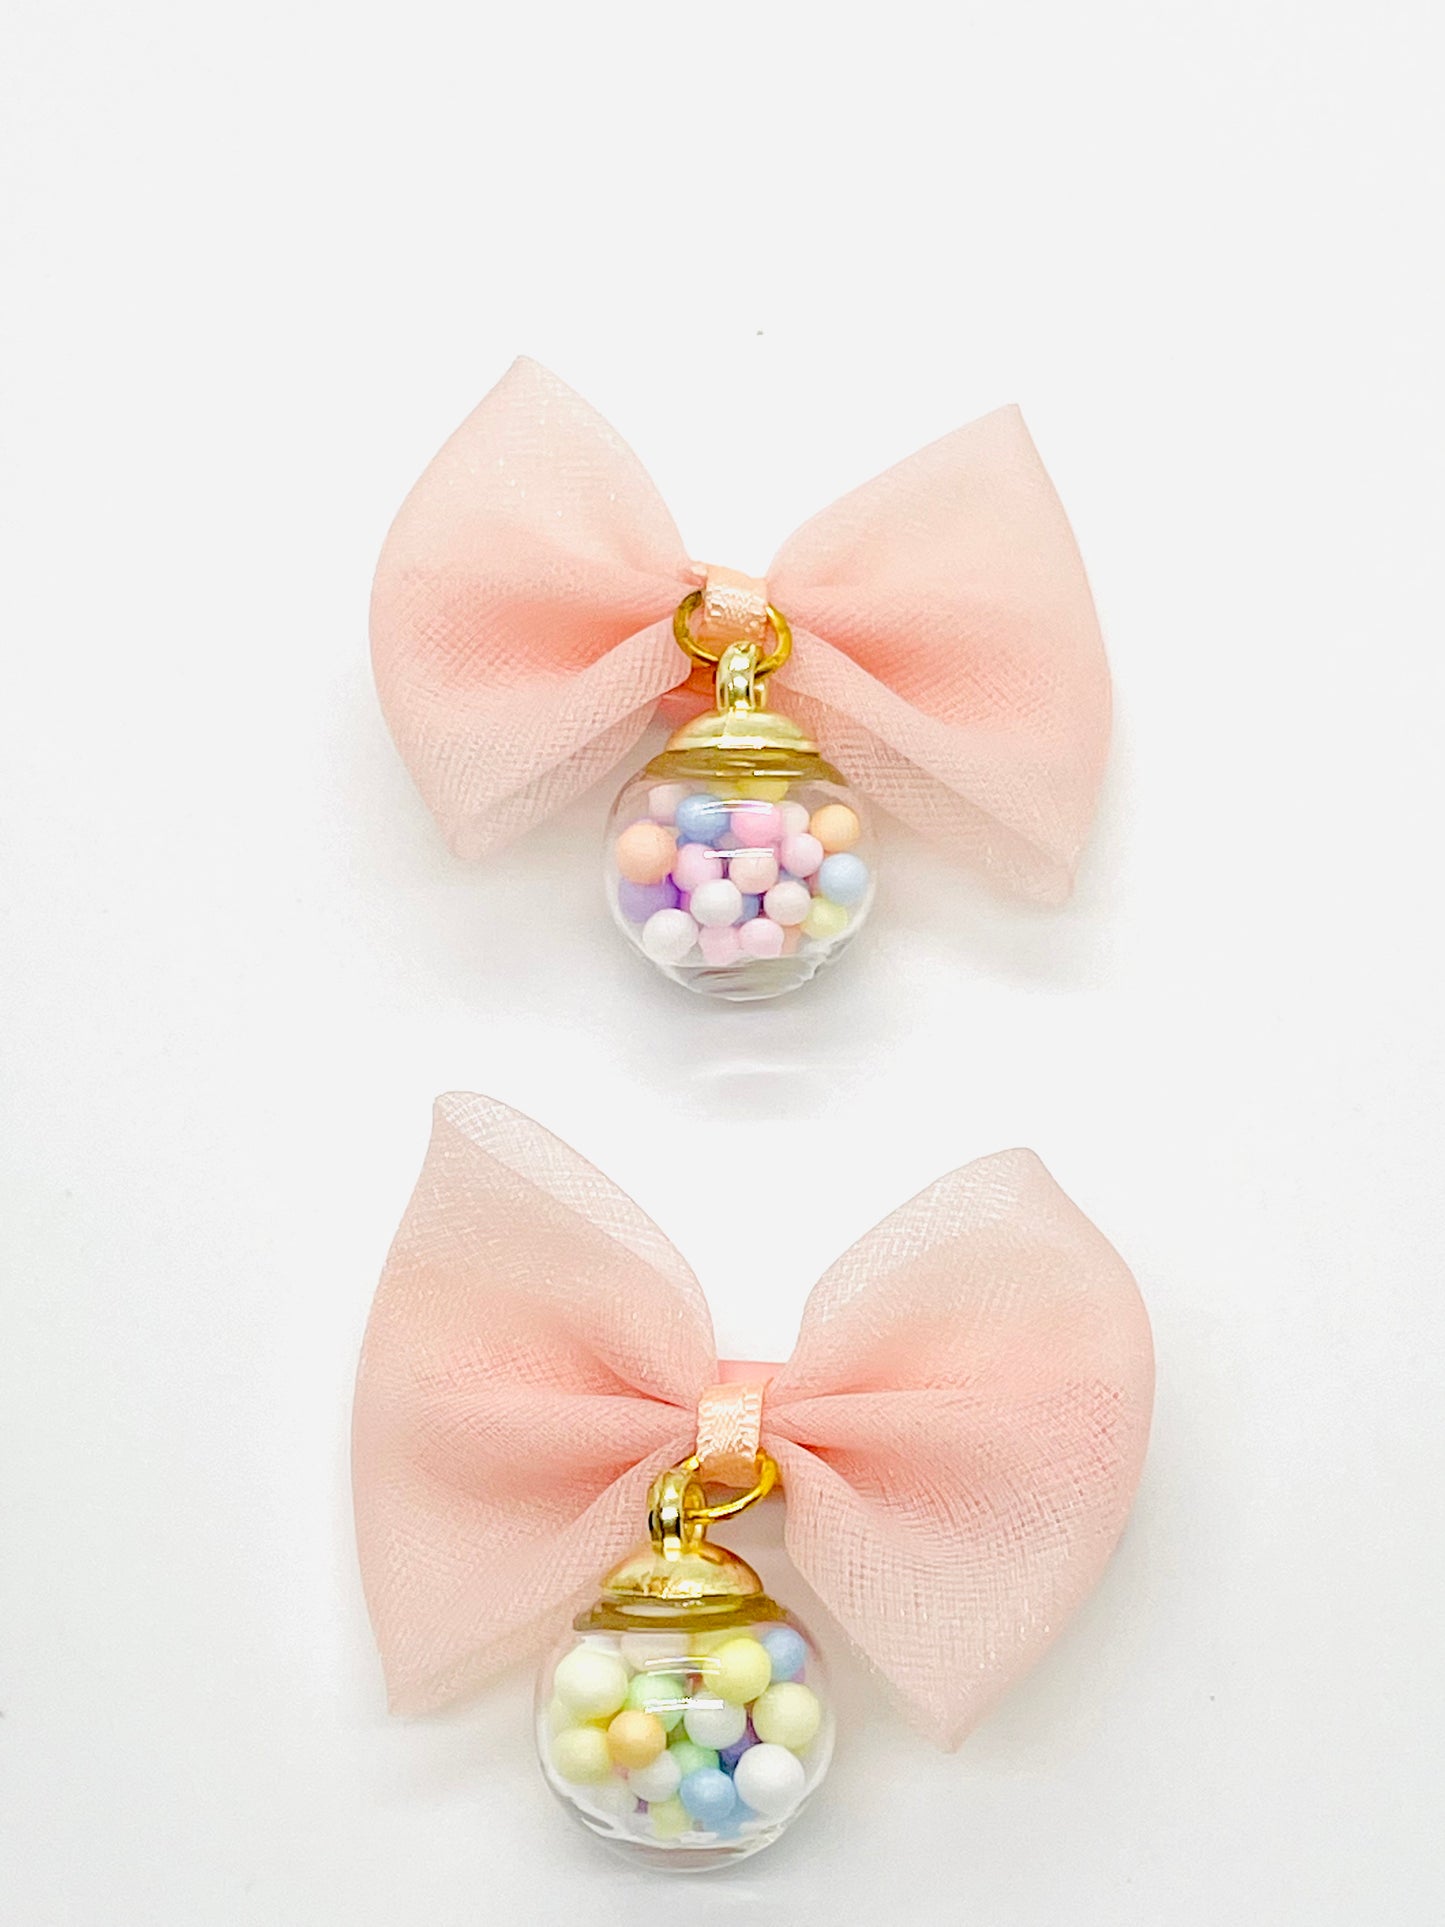 Set of Barrettes in nude and colorful bubble